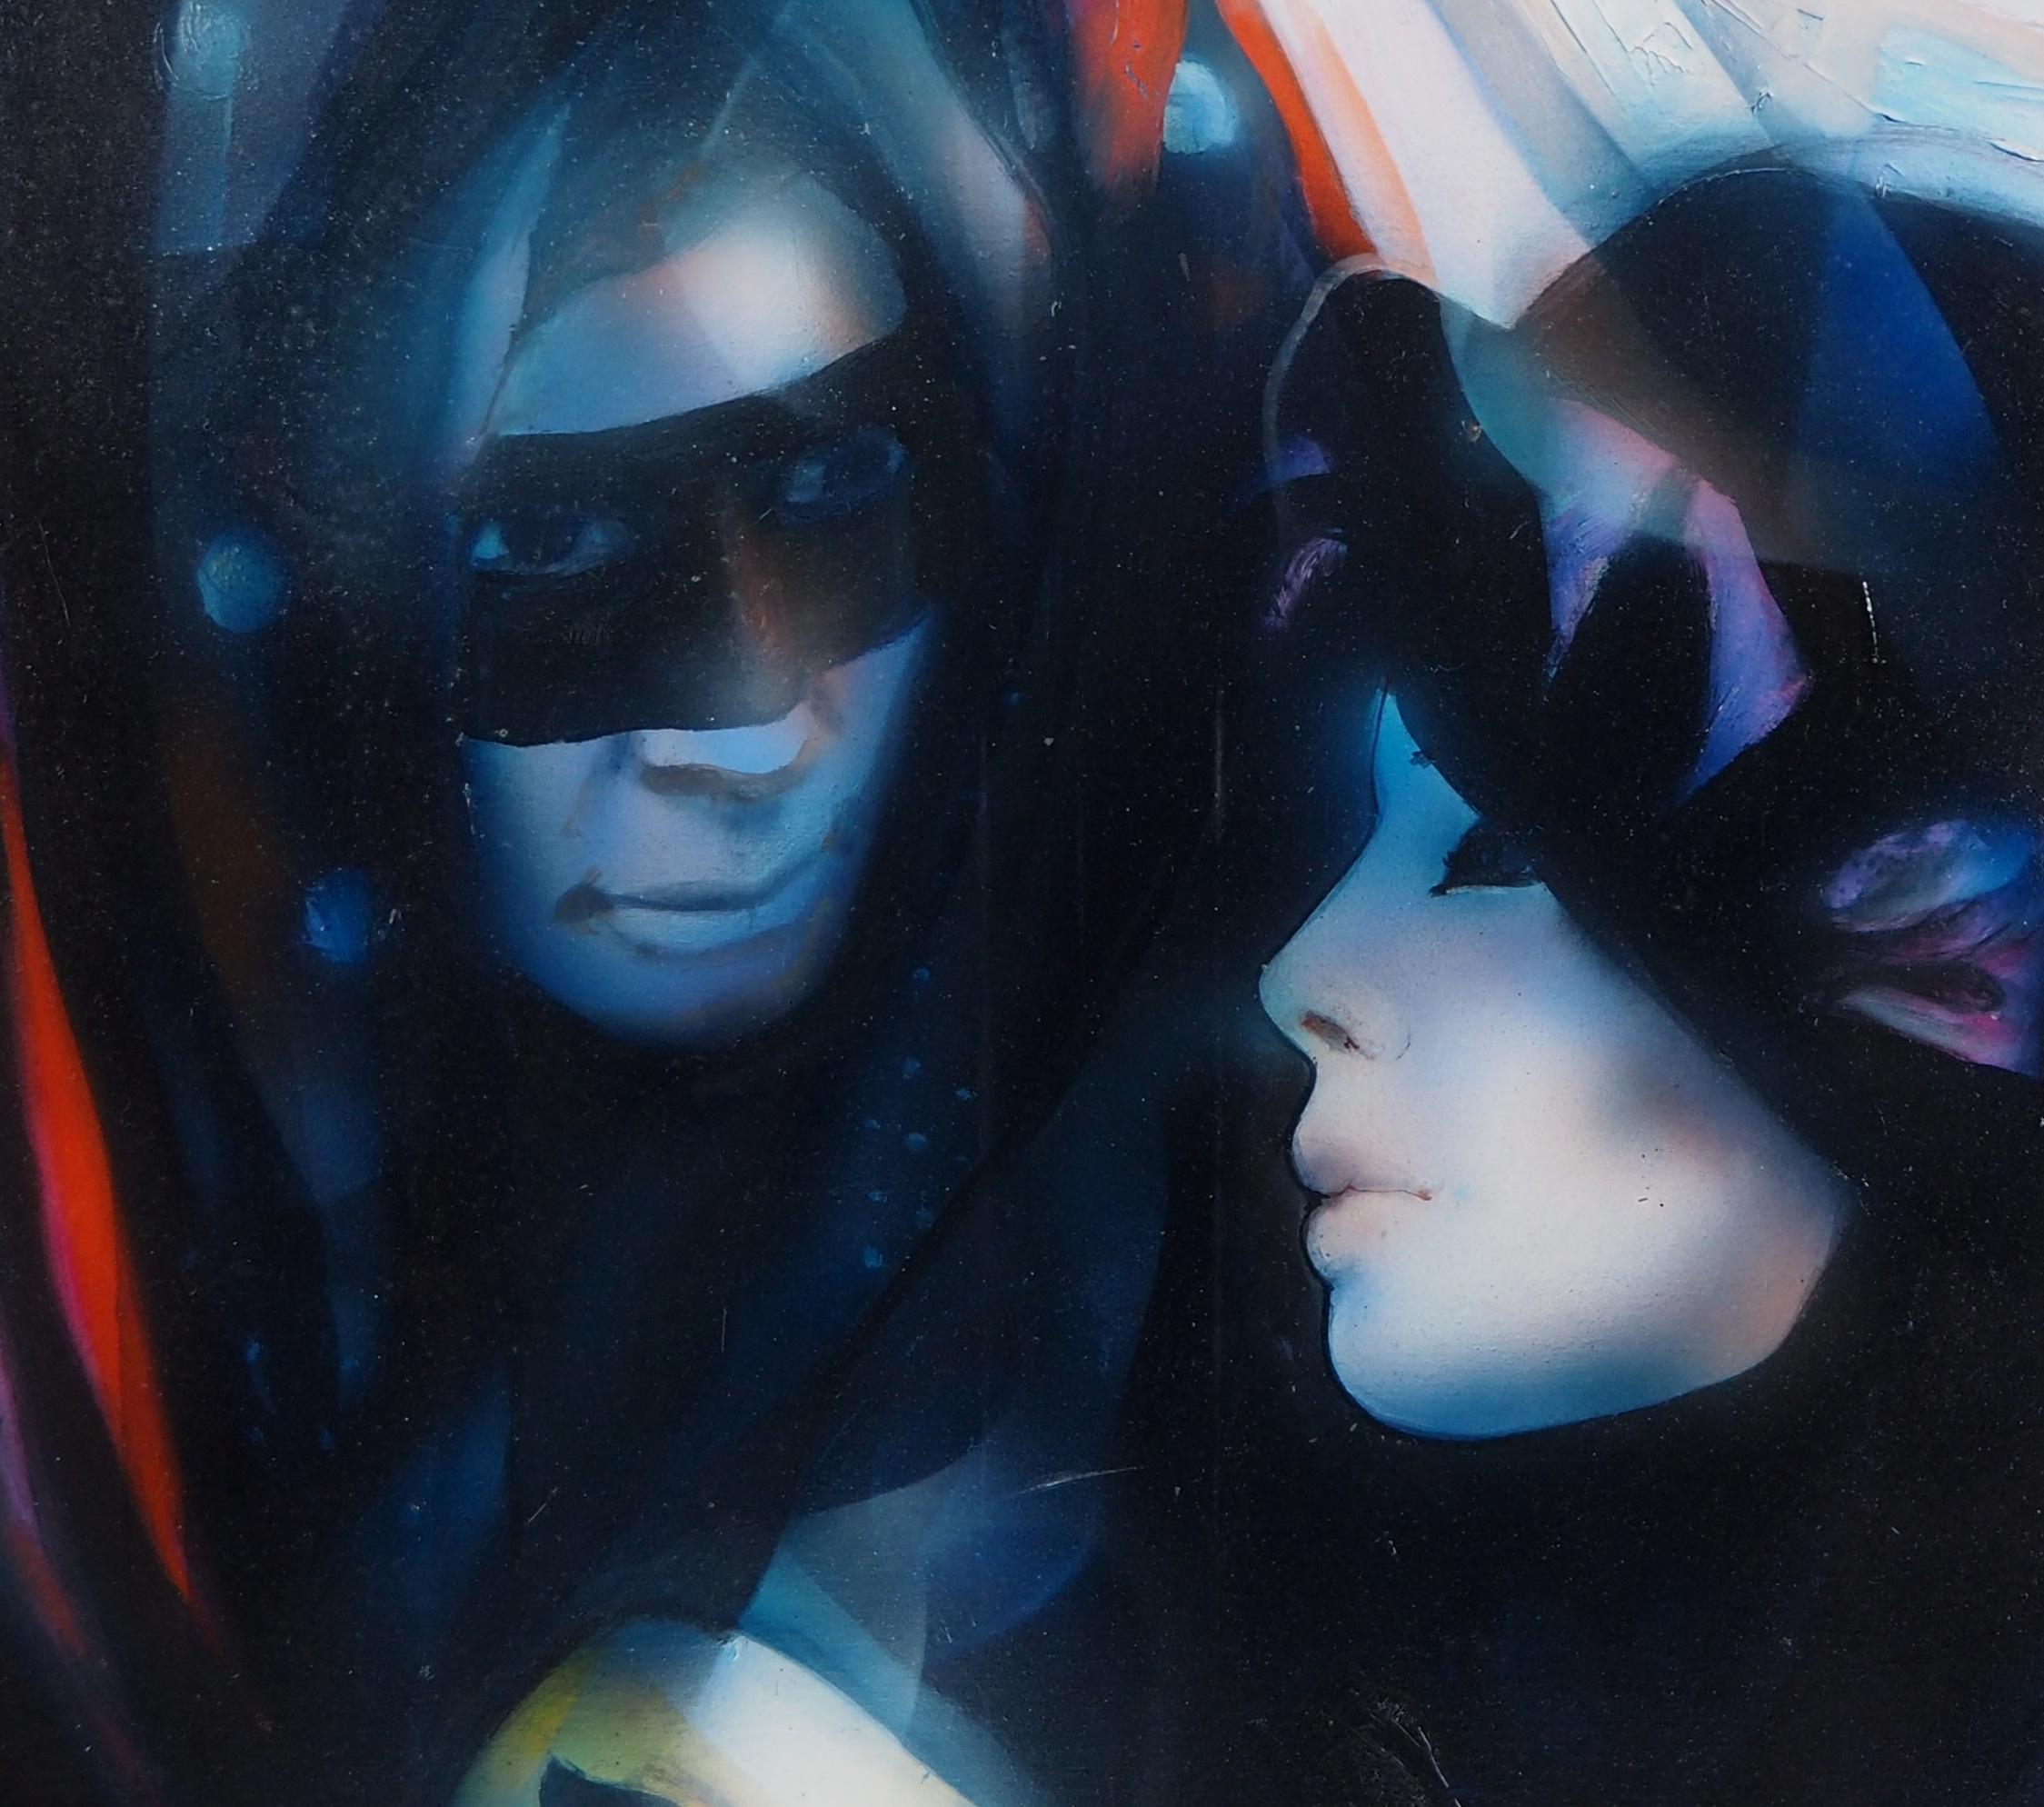 Venice carnival : The Lovers - Handsigned oil on canvas - Black Figurative Painting by Jean-Baptiste Valadie